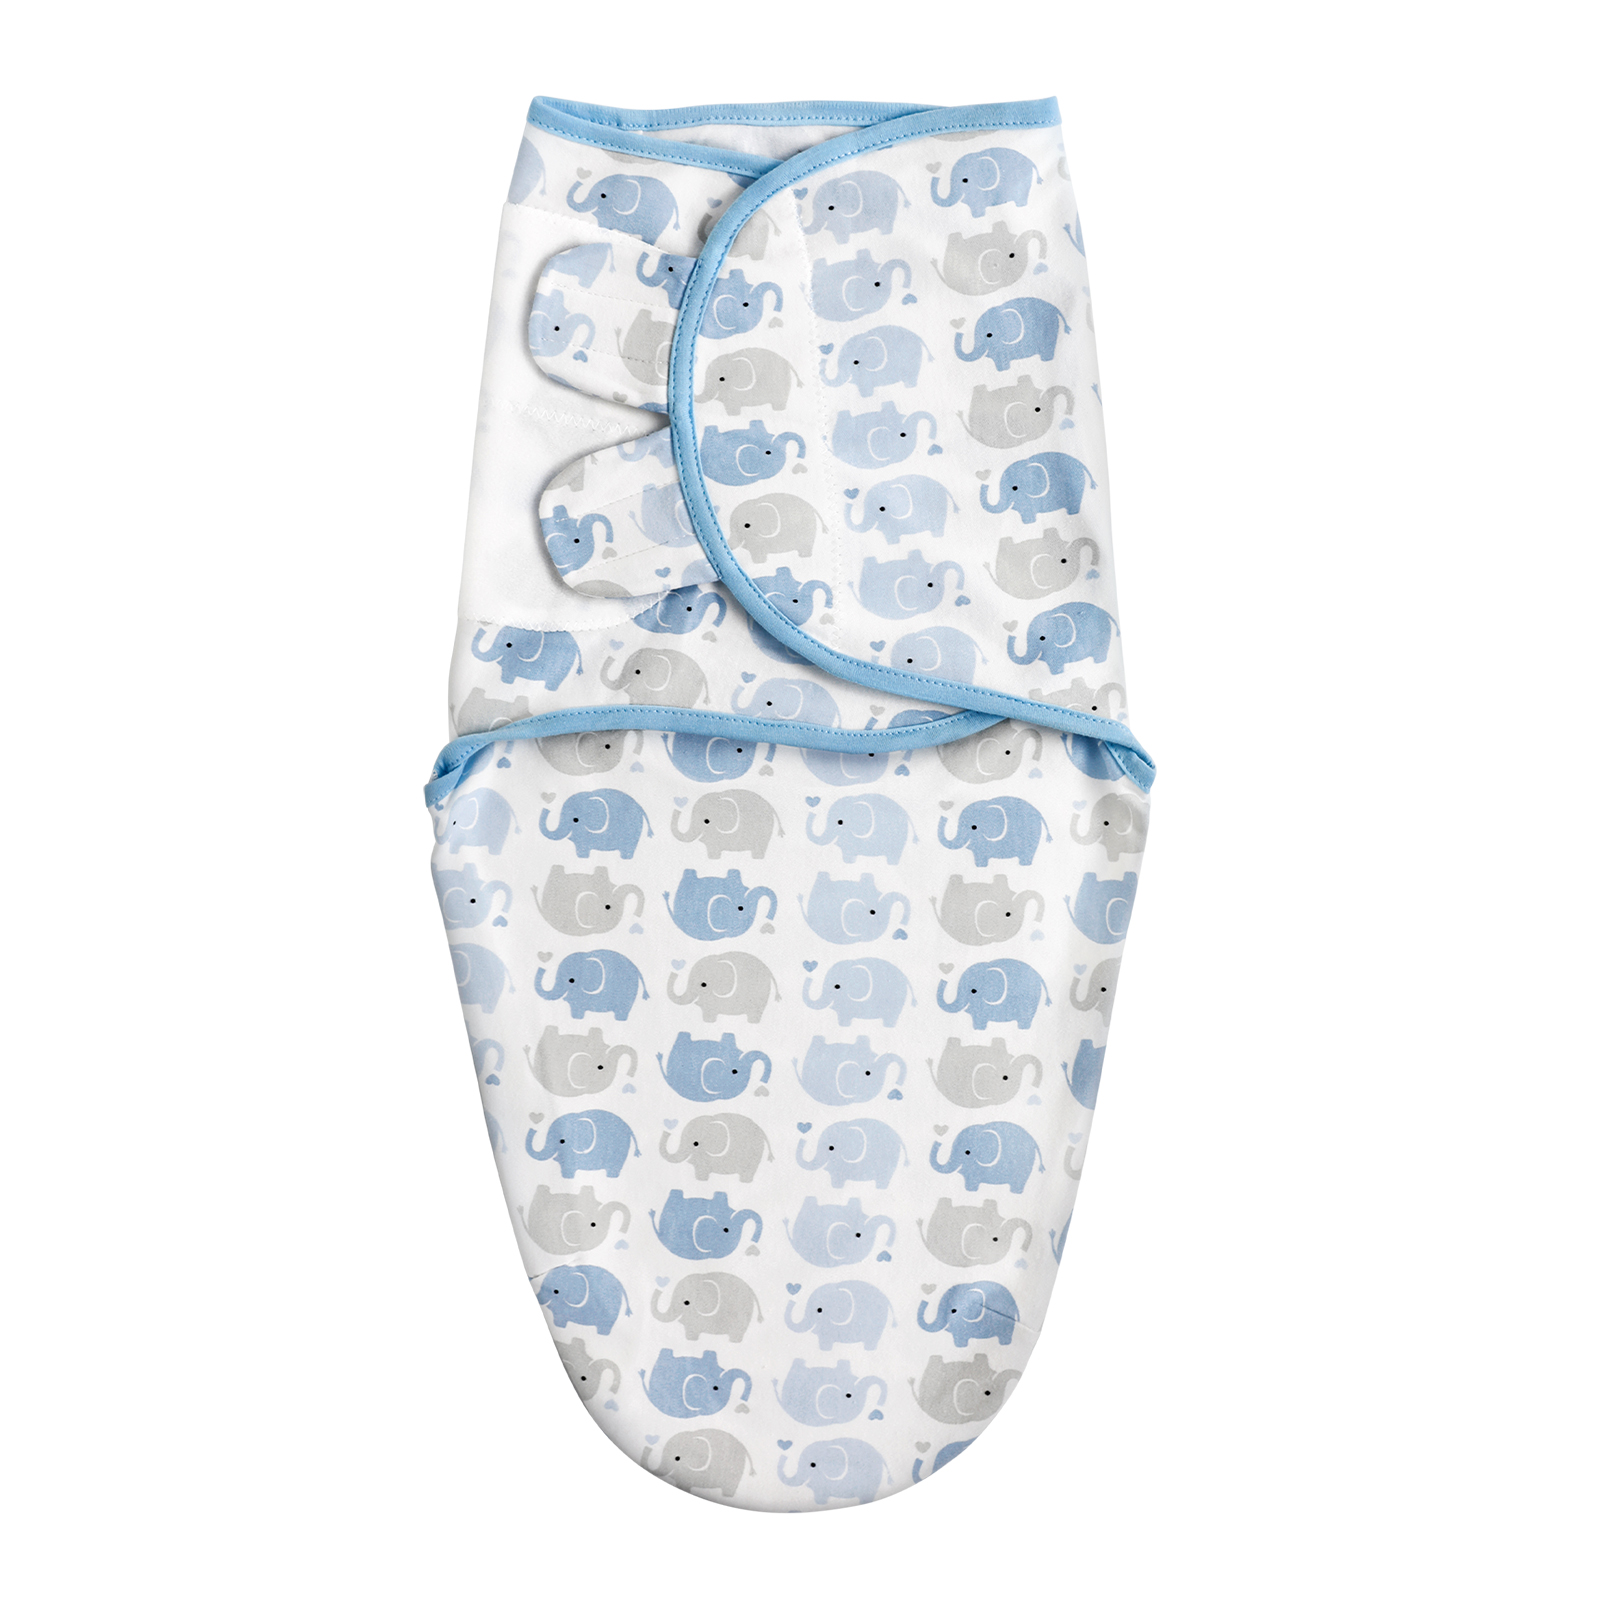 Elephant | Gllquen Baby Swaddle 0-3 Months 1-Pack